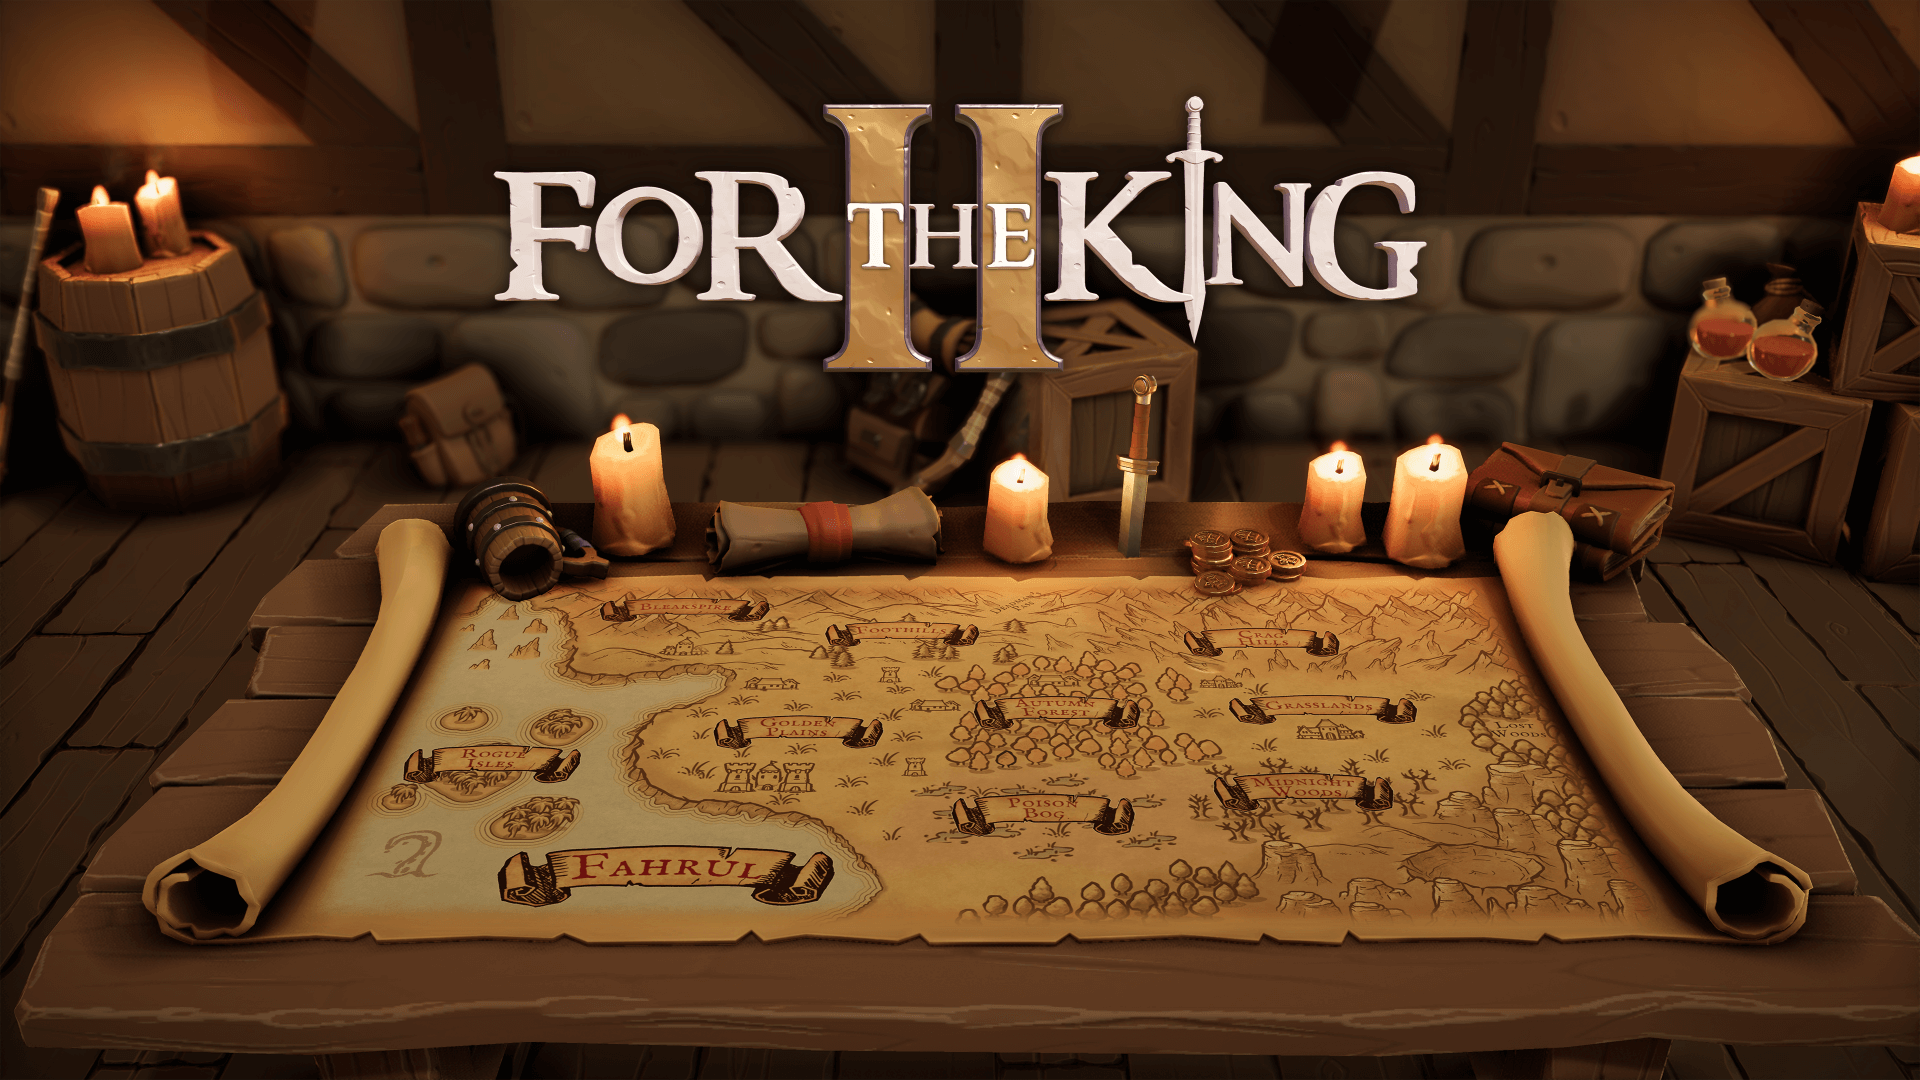 THE KING II LAUNCH DATE WAS ANNOUNCED FOR NOVEMBER 2